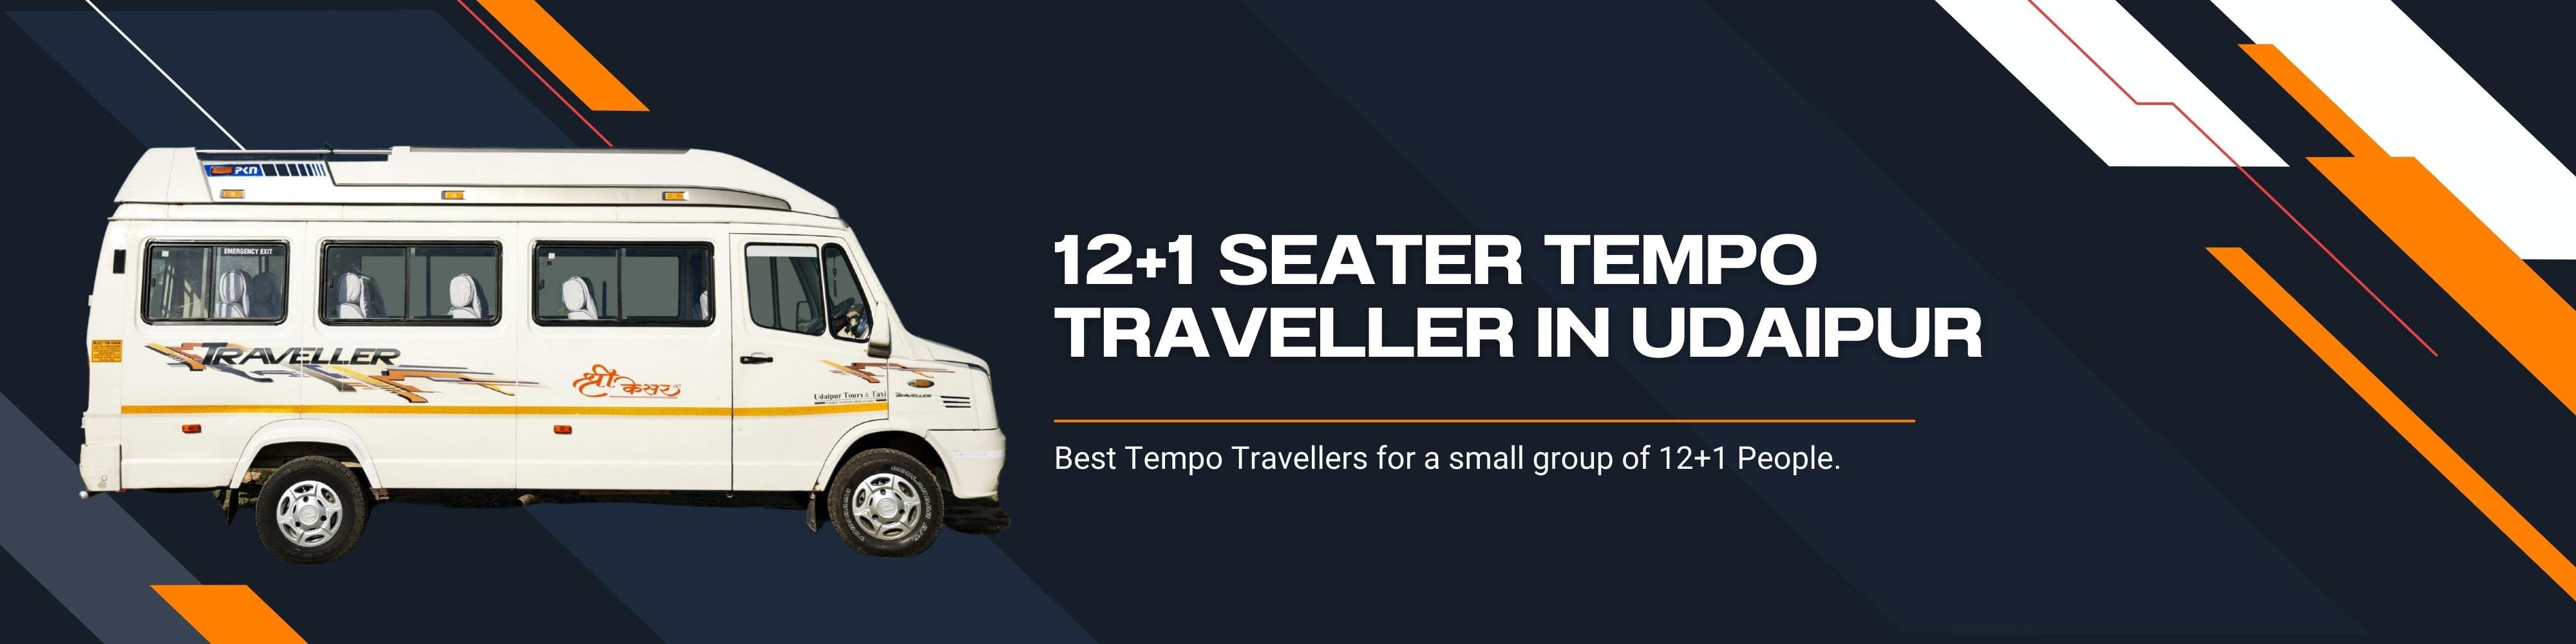 12+1 Seater Tempo Traveller On Rent In Udaipur